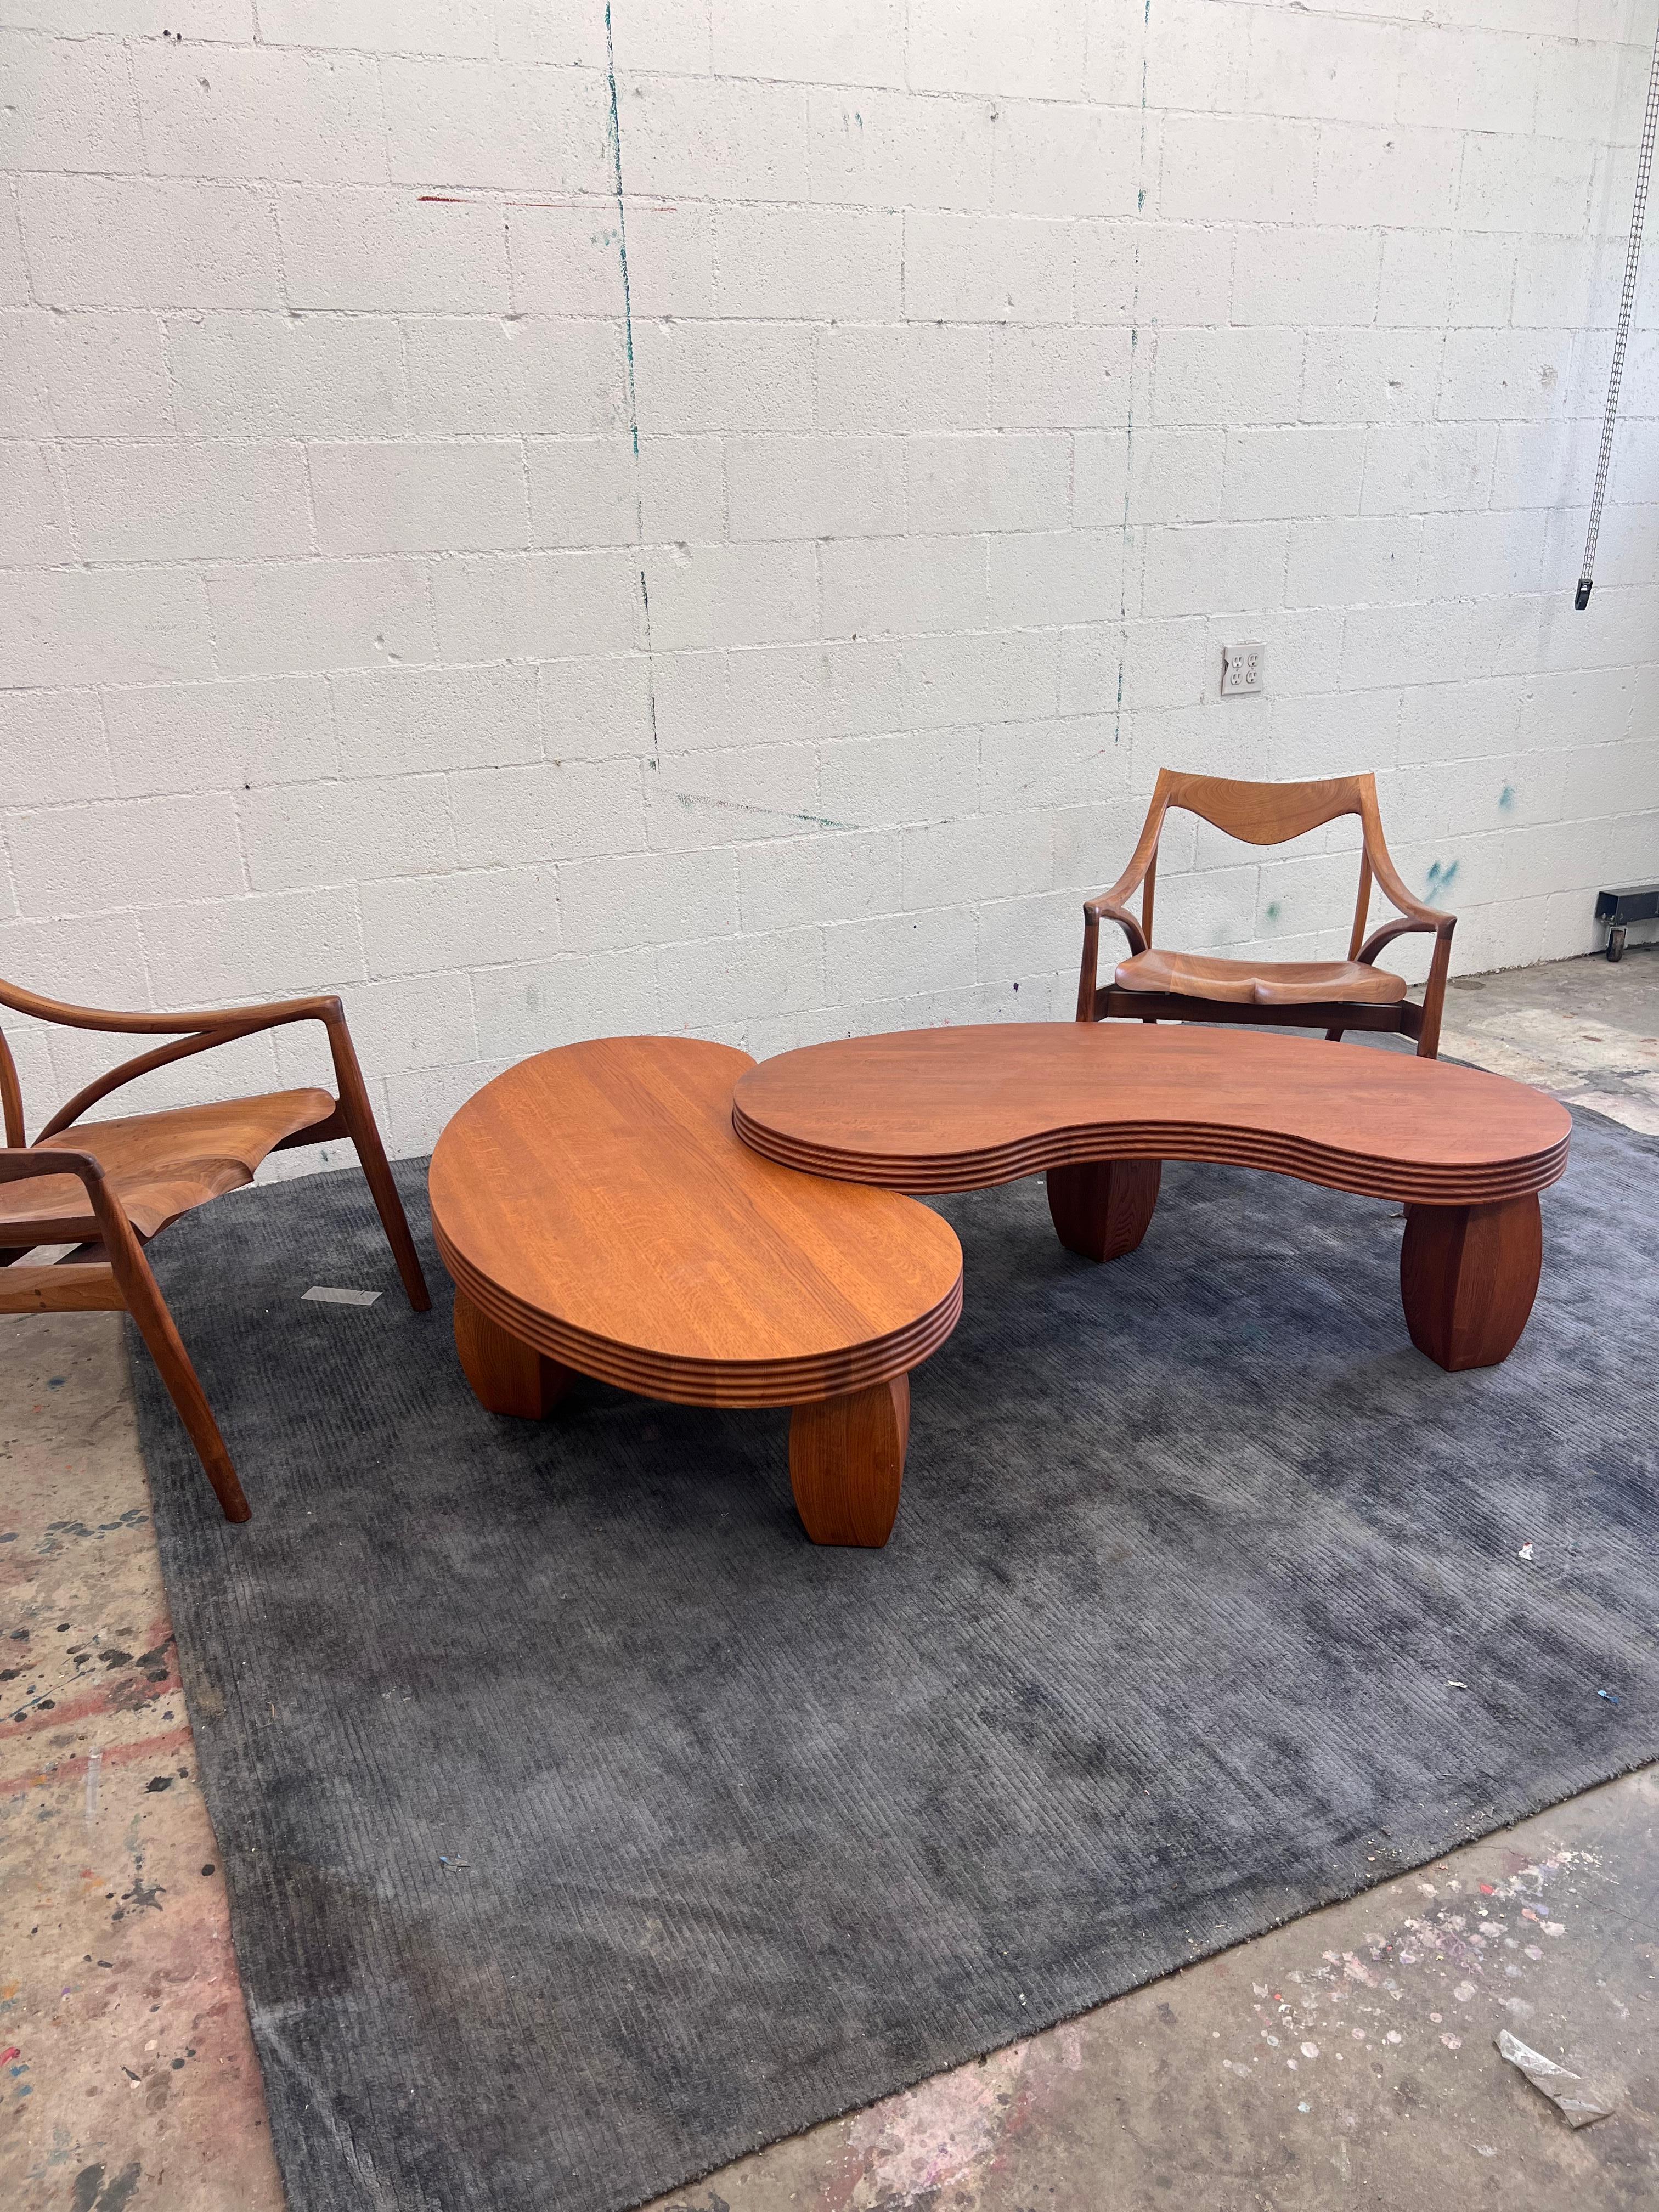 A pair of large organic free-formed hand build solid American Red oak coffee tables. 
This pair can be positioned in numerous arrangements. 

Retails for $1,700 each or $3,400+ for the pair 

Extremely heavy weighing 90lbs each. The top slab is 2.8”